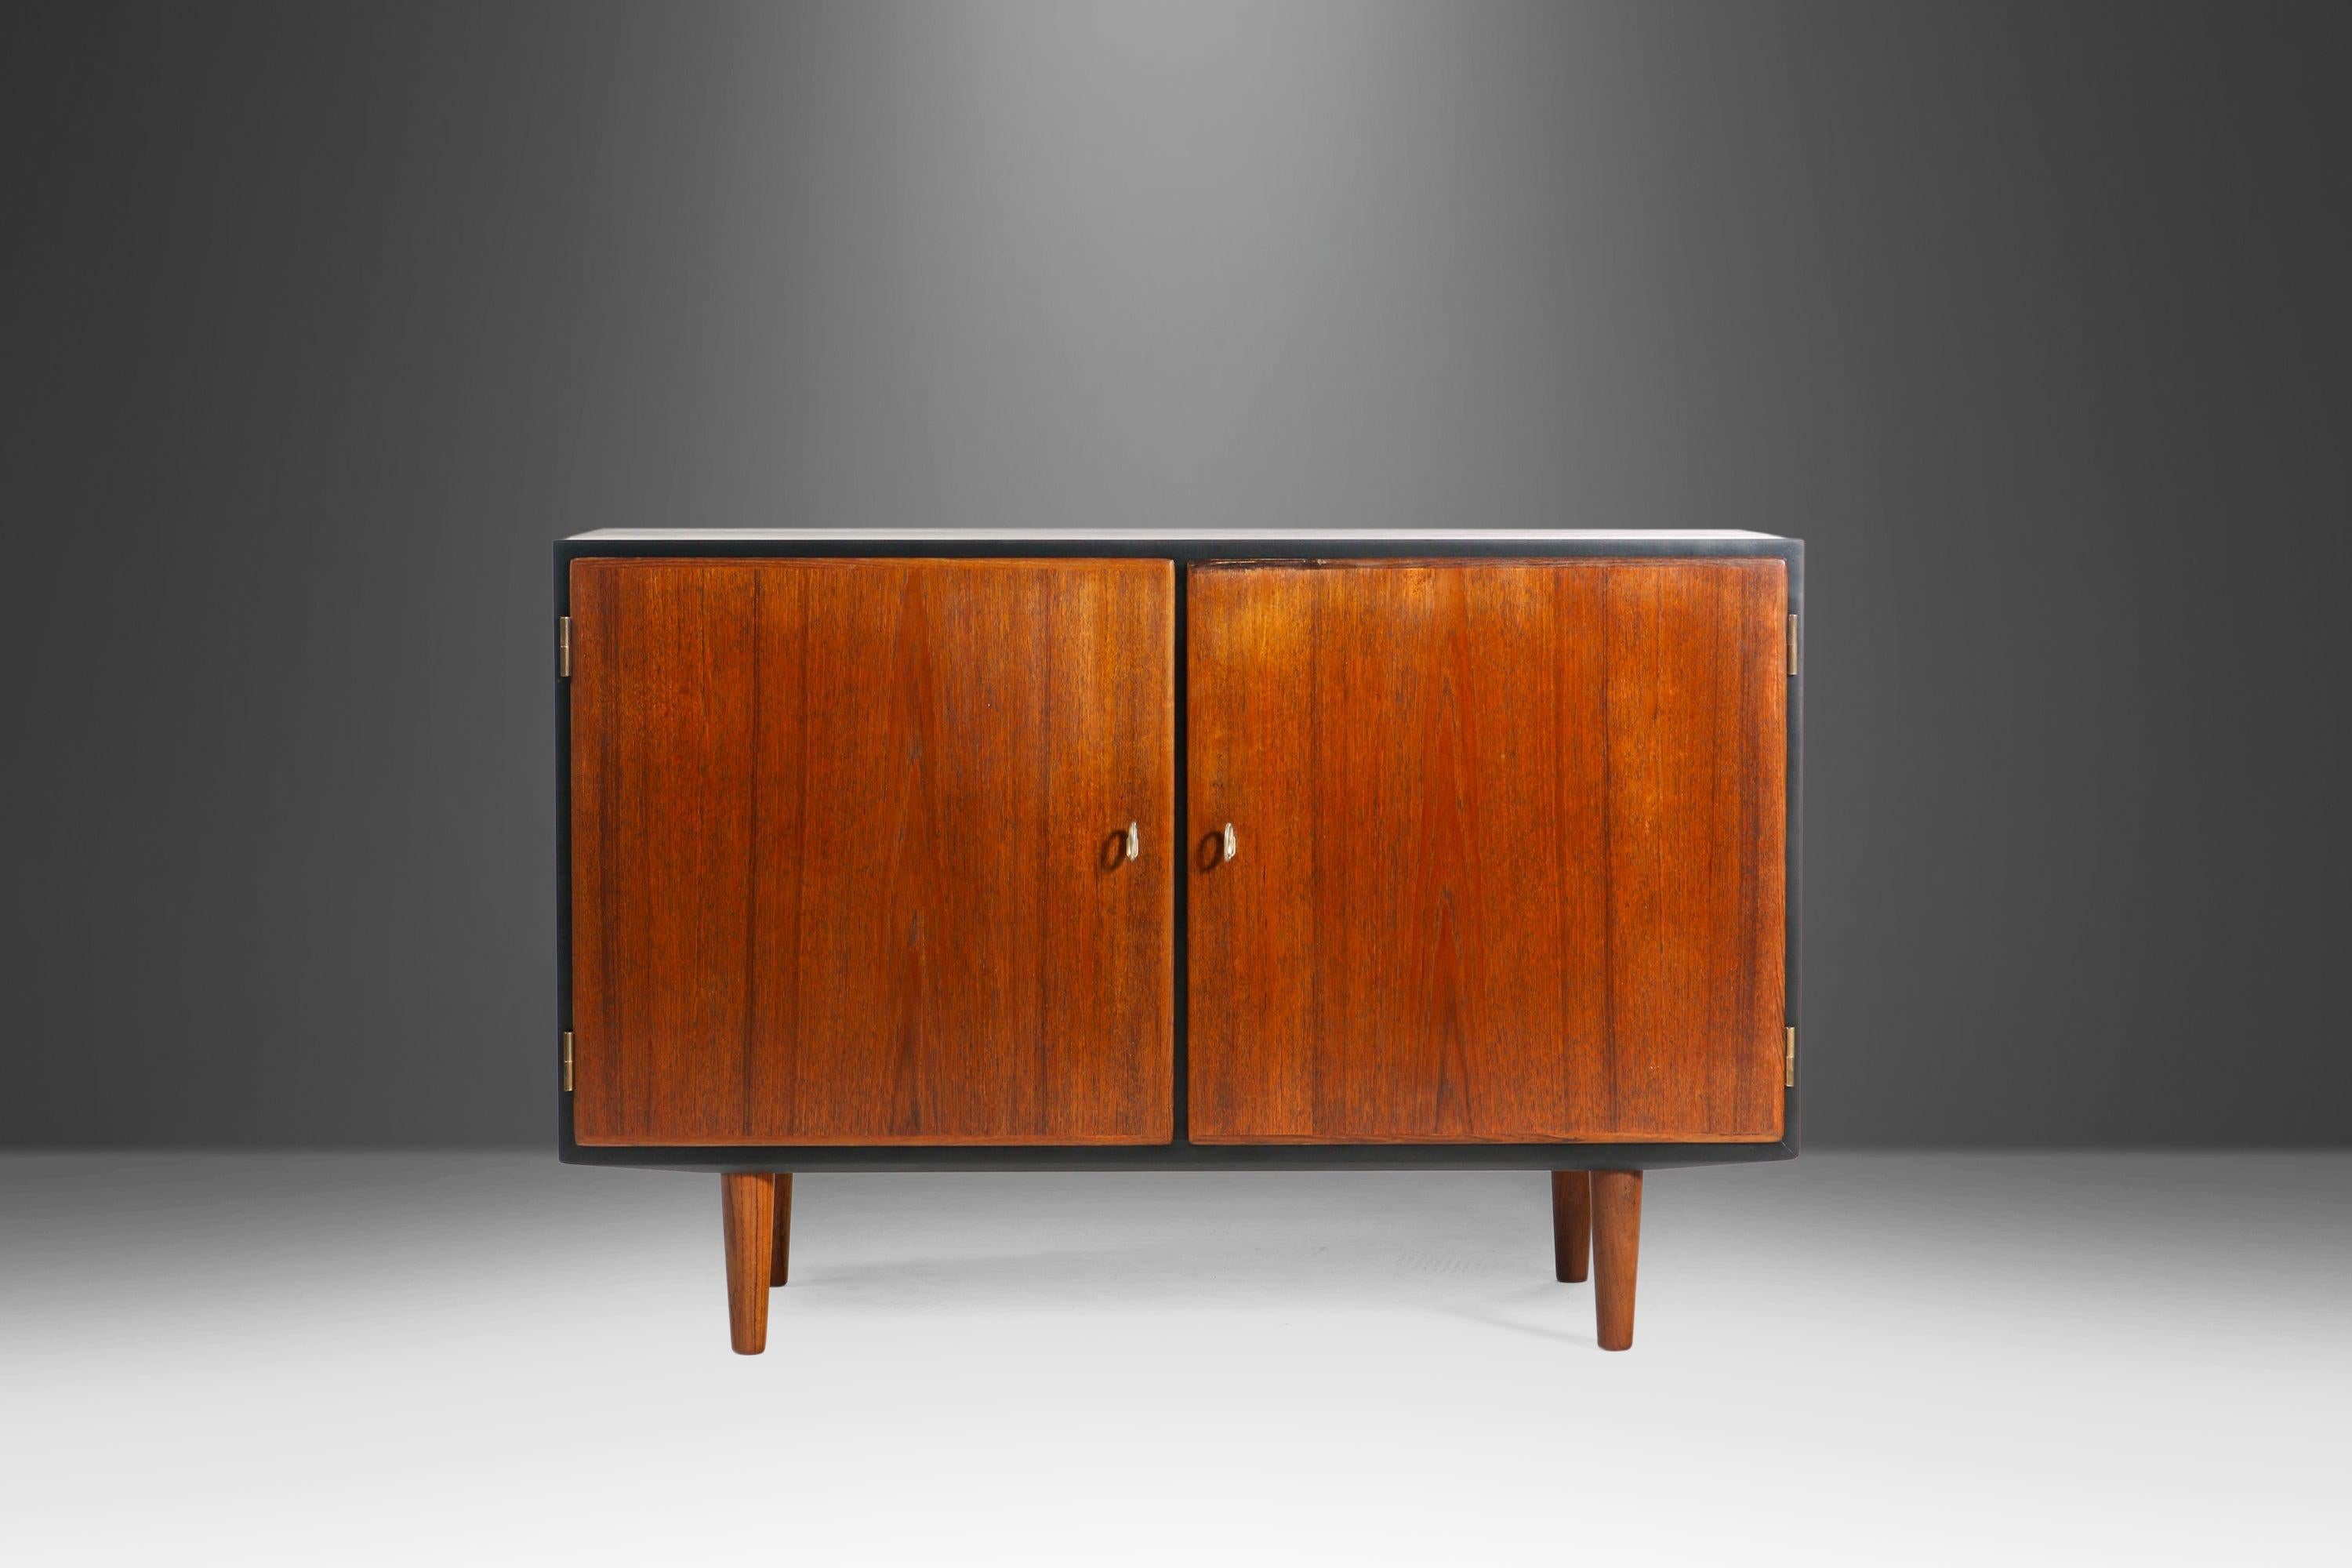 This cabinet is as functional as it is visually striking. Recently restored, this extraordinary sideboard features a newly ebonized frame that perfectly offsets the exceptional teak door faces and legs. Inside there are two adjustable shelves and